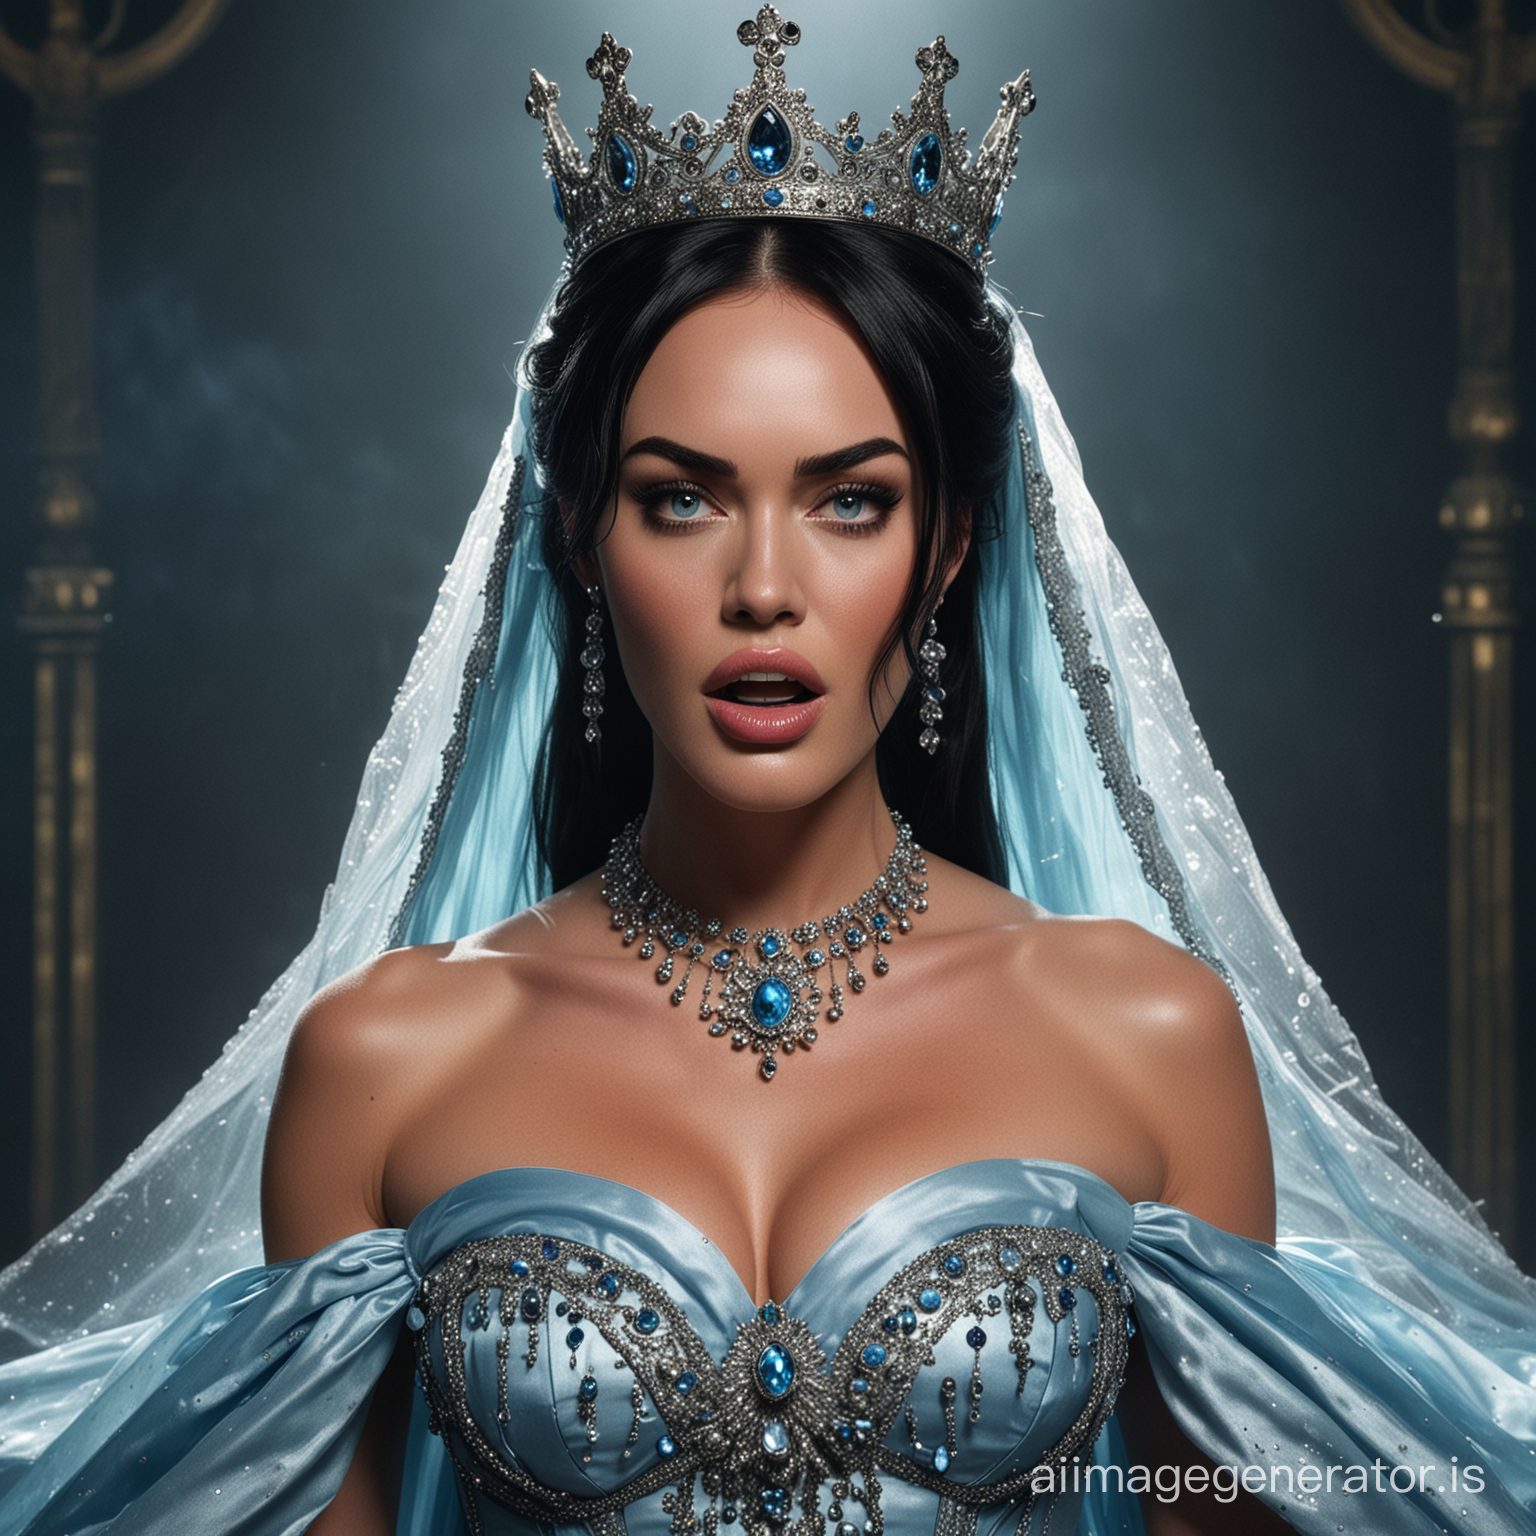 Upper body view of Megan Fox as a terrified beautiful queen, mouth agape in a scream, eyes wide with fear, black hair coiled in bun, adorned in a large sky blue satin ball gown with a lot of crystals, gemstones sparkling gigantic crinoline hoopskirt, heavy royal cape trailing behind, magnificent huge crown, regal presence, fear accentuated, digital painting, ultra realistic, dramatic lighting, volumetric textures, high resolution.